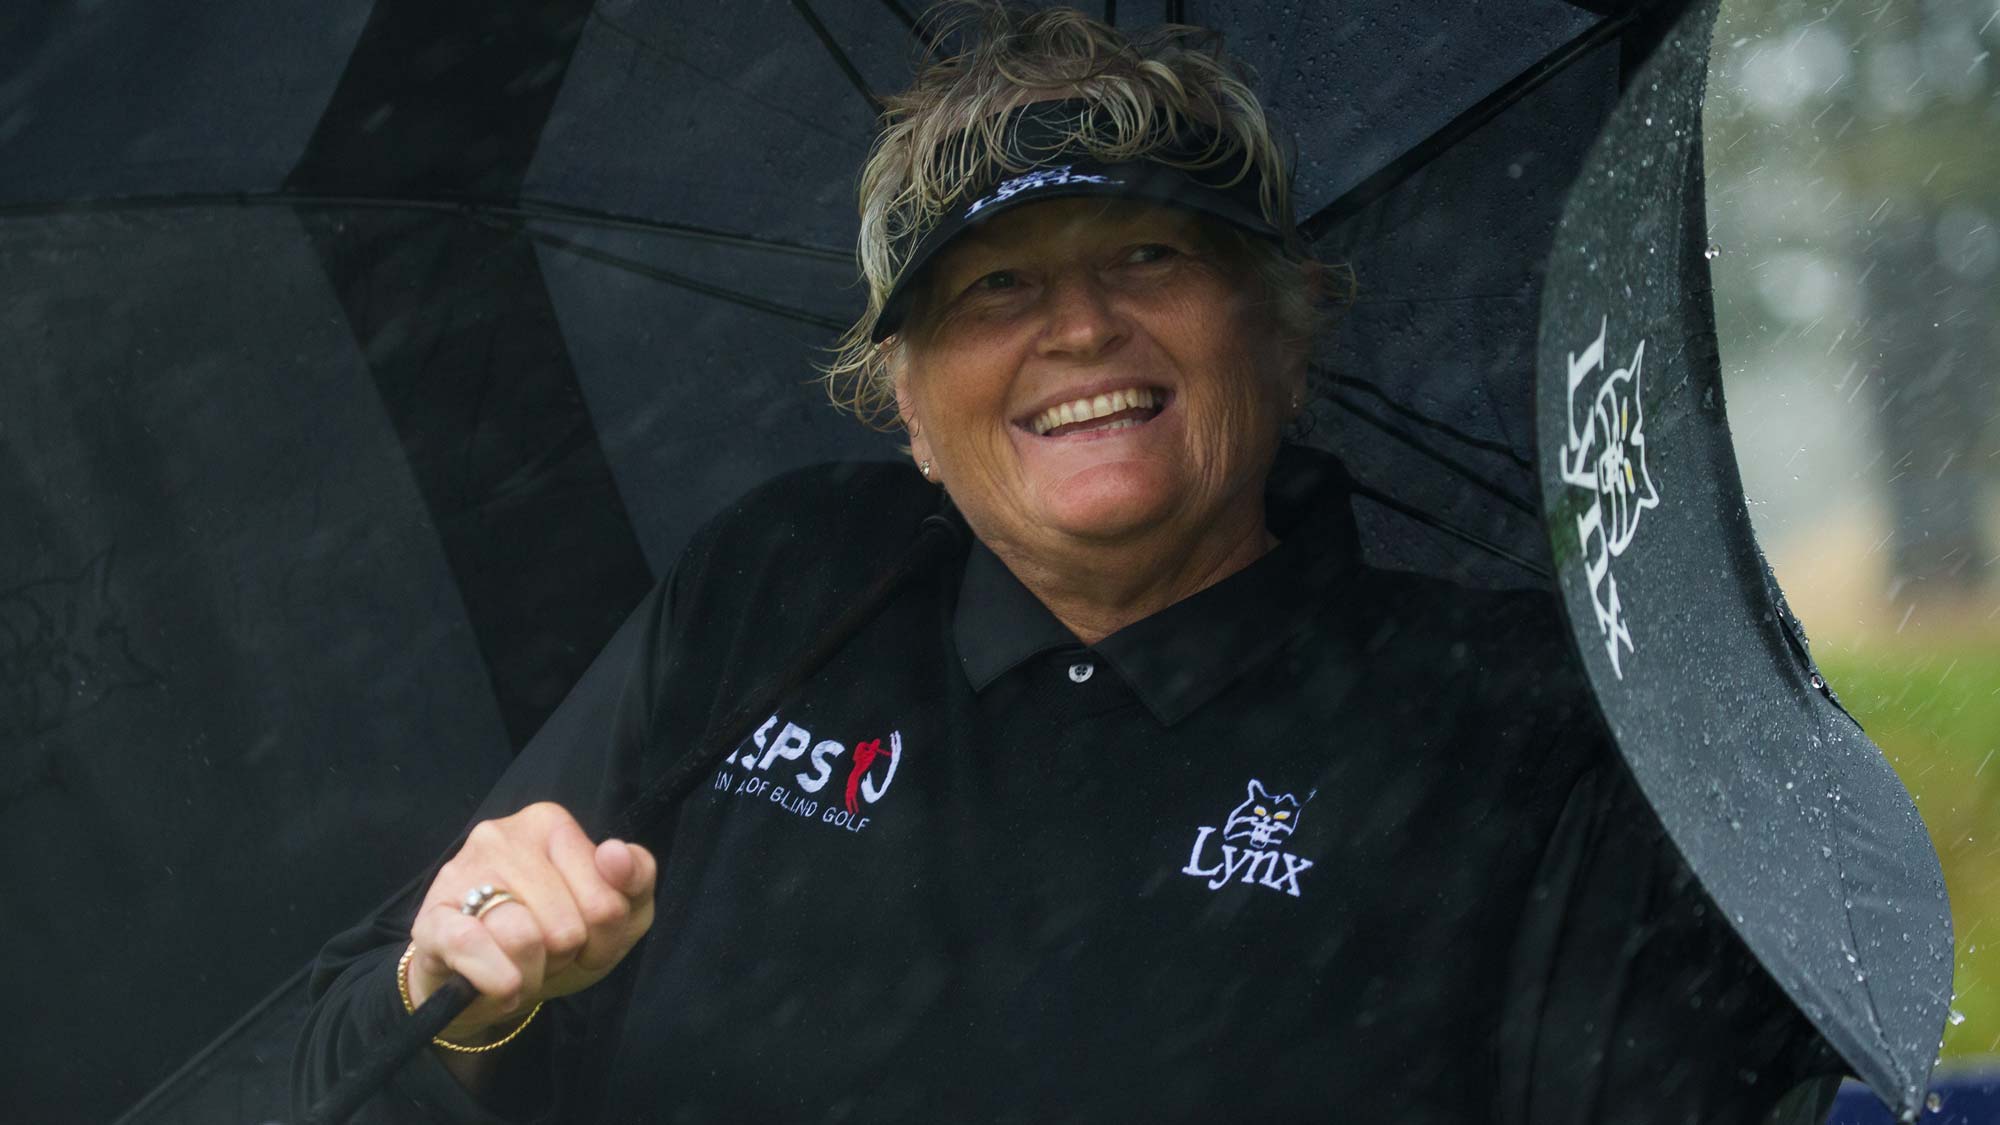 Dame Laura Davies of England smiles despite the rain during the second round.